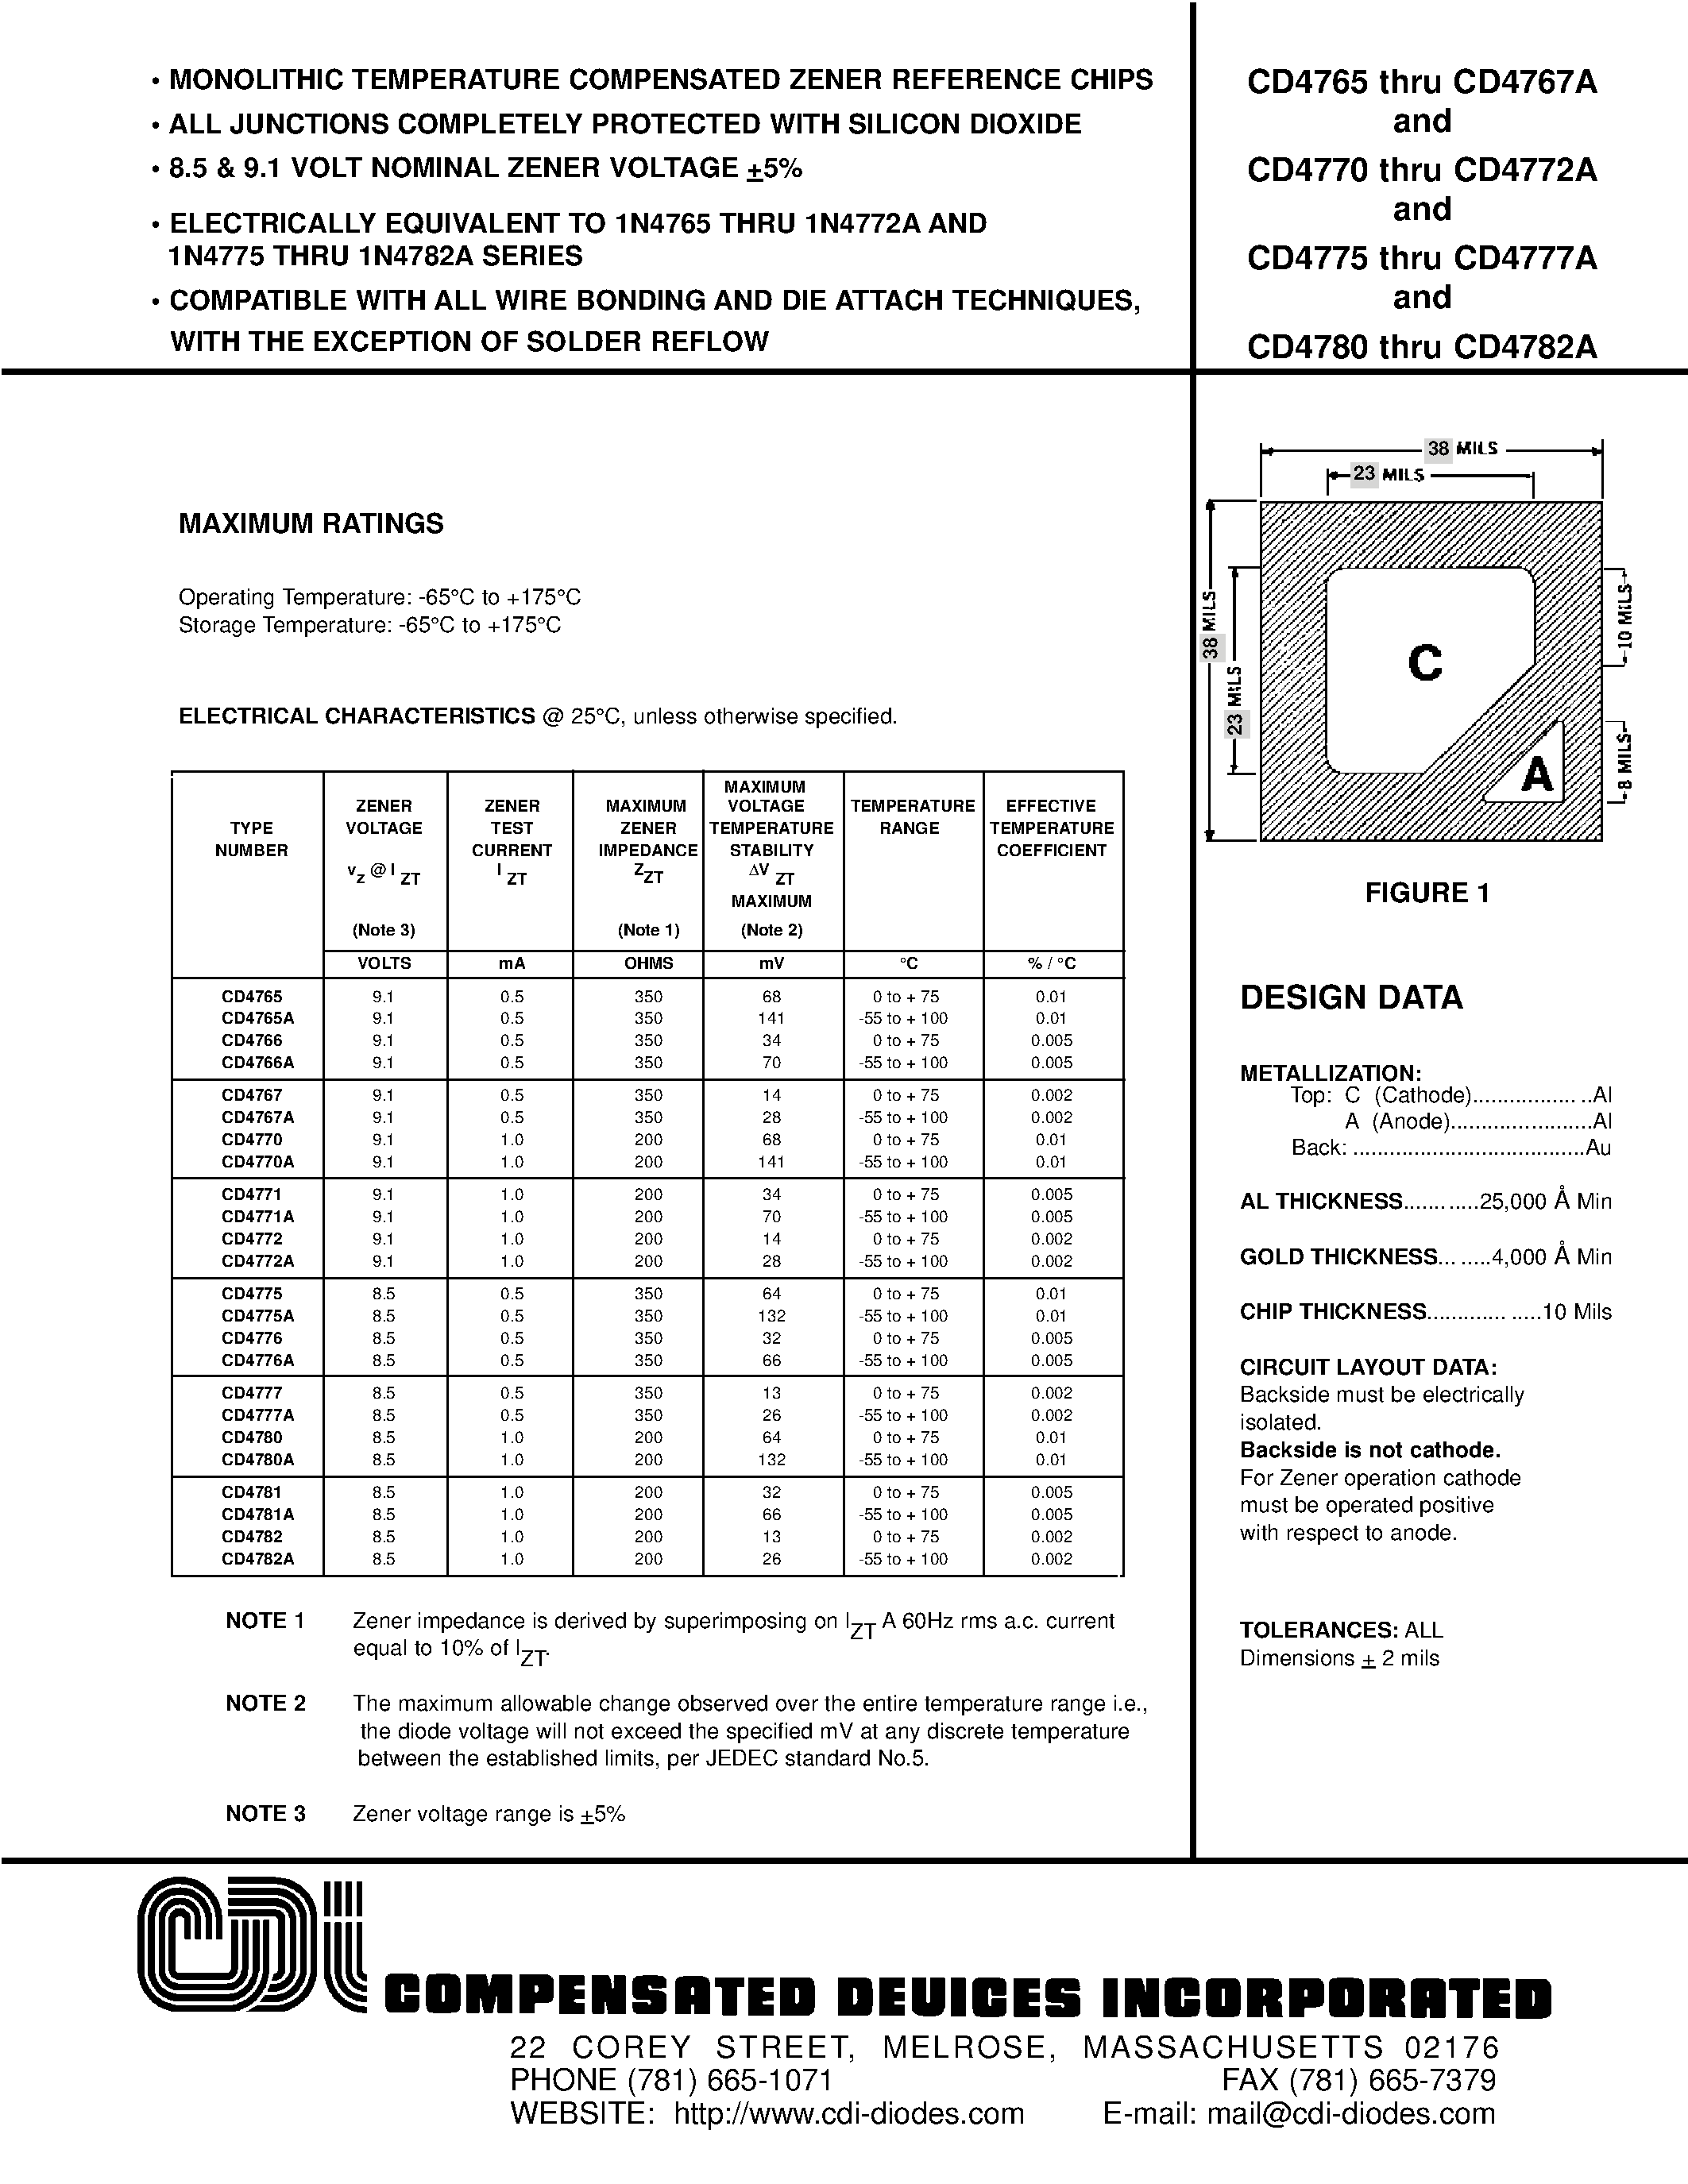 Datasheet CD4770A - MONOLITHIC TEMPERATURE COMPENSATED ZENER REFERENCE CHIPS page 1